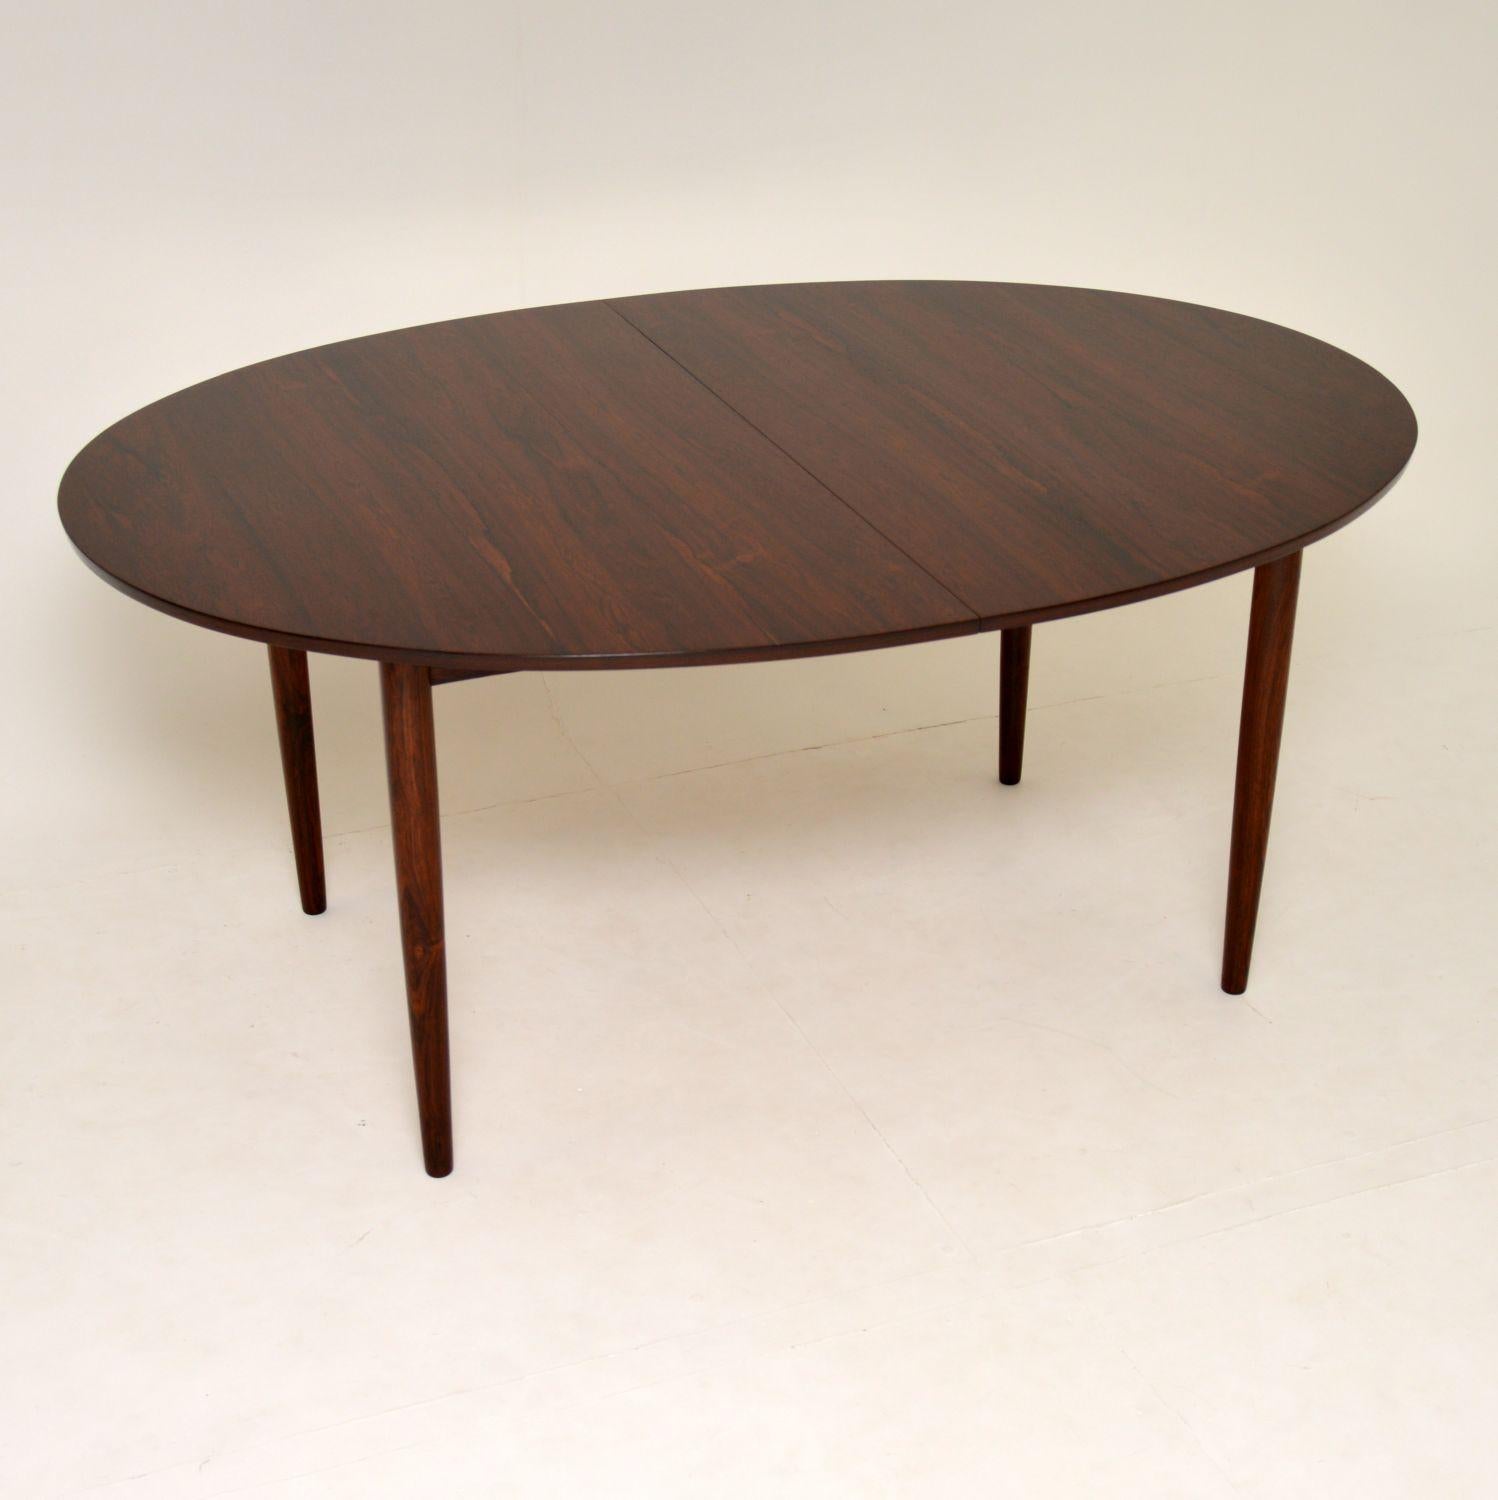 An extremely rare and beautiful Danish dining table, designed by Finn Juhl. This was made in Denmark in the 1960s by the master cabinet maker Niels Vodder. It was kept covered for 50 years by the previous owner, so it’s still in excellent condition